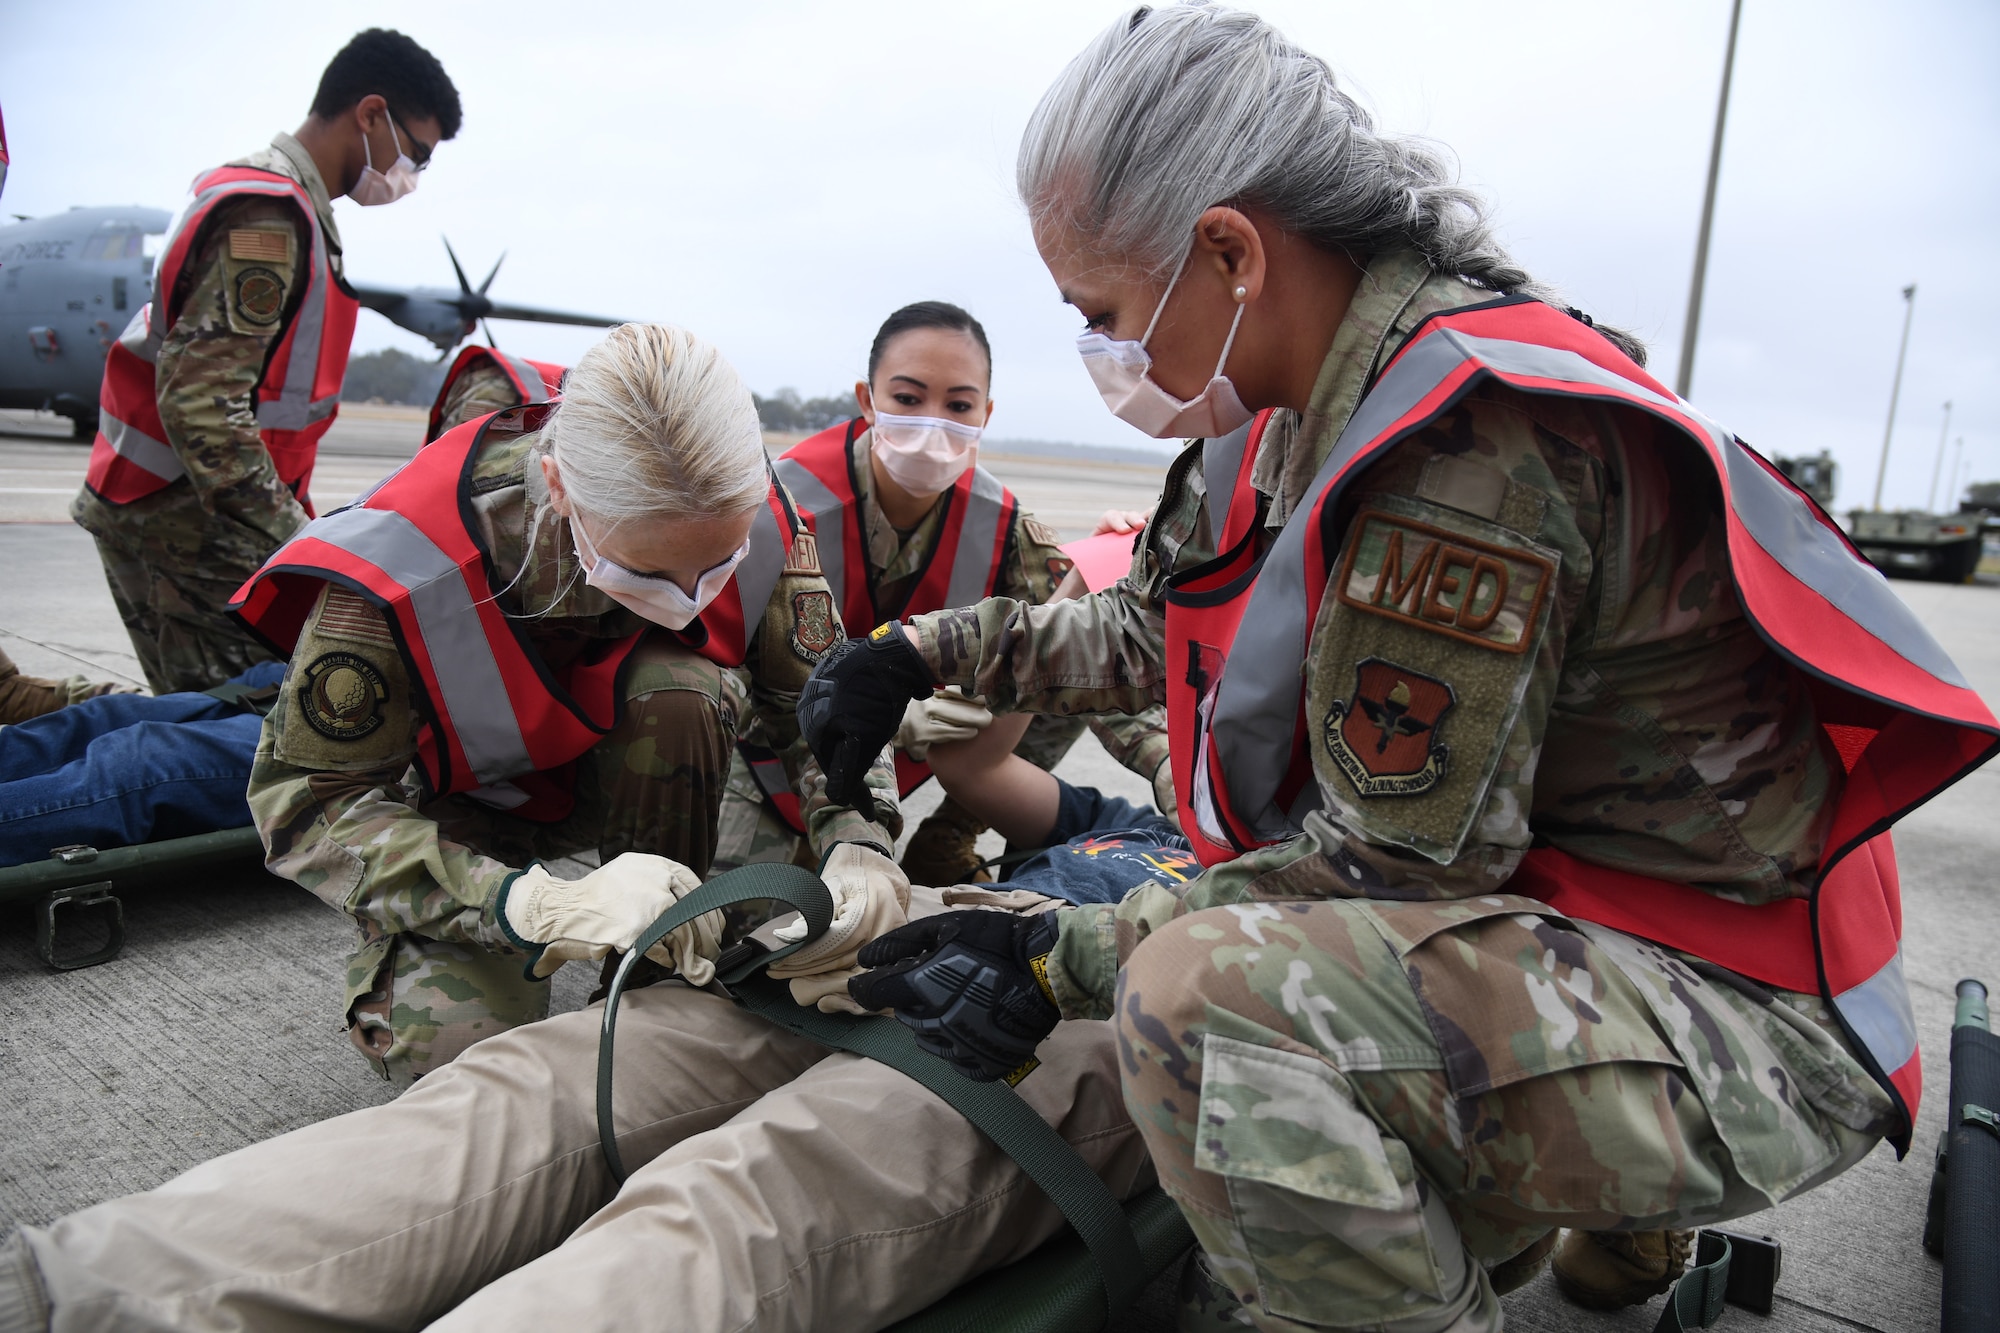 Members of the 81st Medical Group secure patients to stretchers during the National Disaster Medical System Exercise outside the 41st Aerial Port Squadron building at Keesler Air Force Base, Mississippi, Feb. 17, 2022. Keesler's Federal Coordination Center was activated and received more than 20 patients during the exercise scenario, which included the New Madrid Fault erupting, sparking an earthquake to occur in Tennessee causing extensive damage and injuring many people. Members of the 81st MDG participated in the event in order to better prepare themselves for real-world situations. (U.S. Air Force photo by Kemberly Groue)